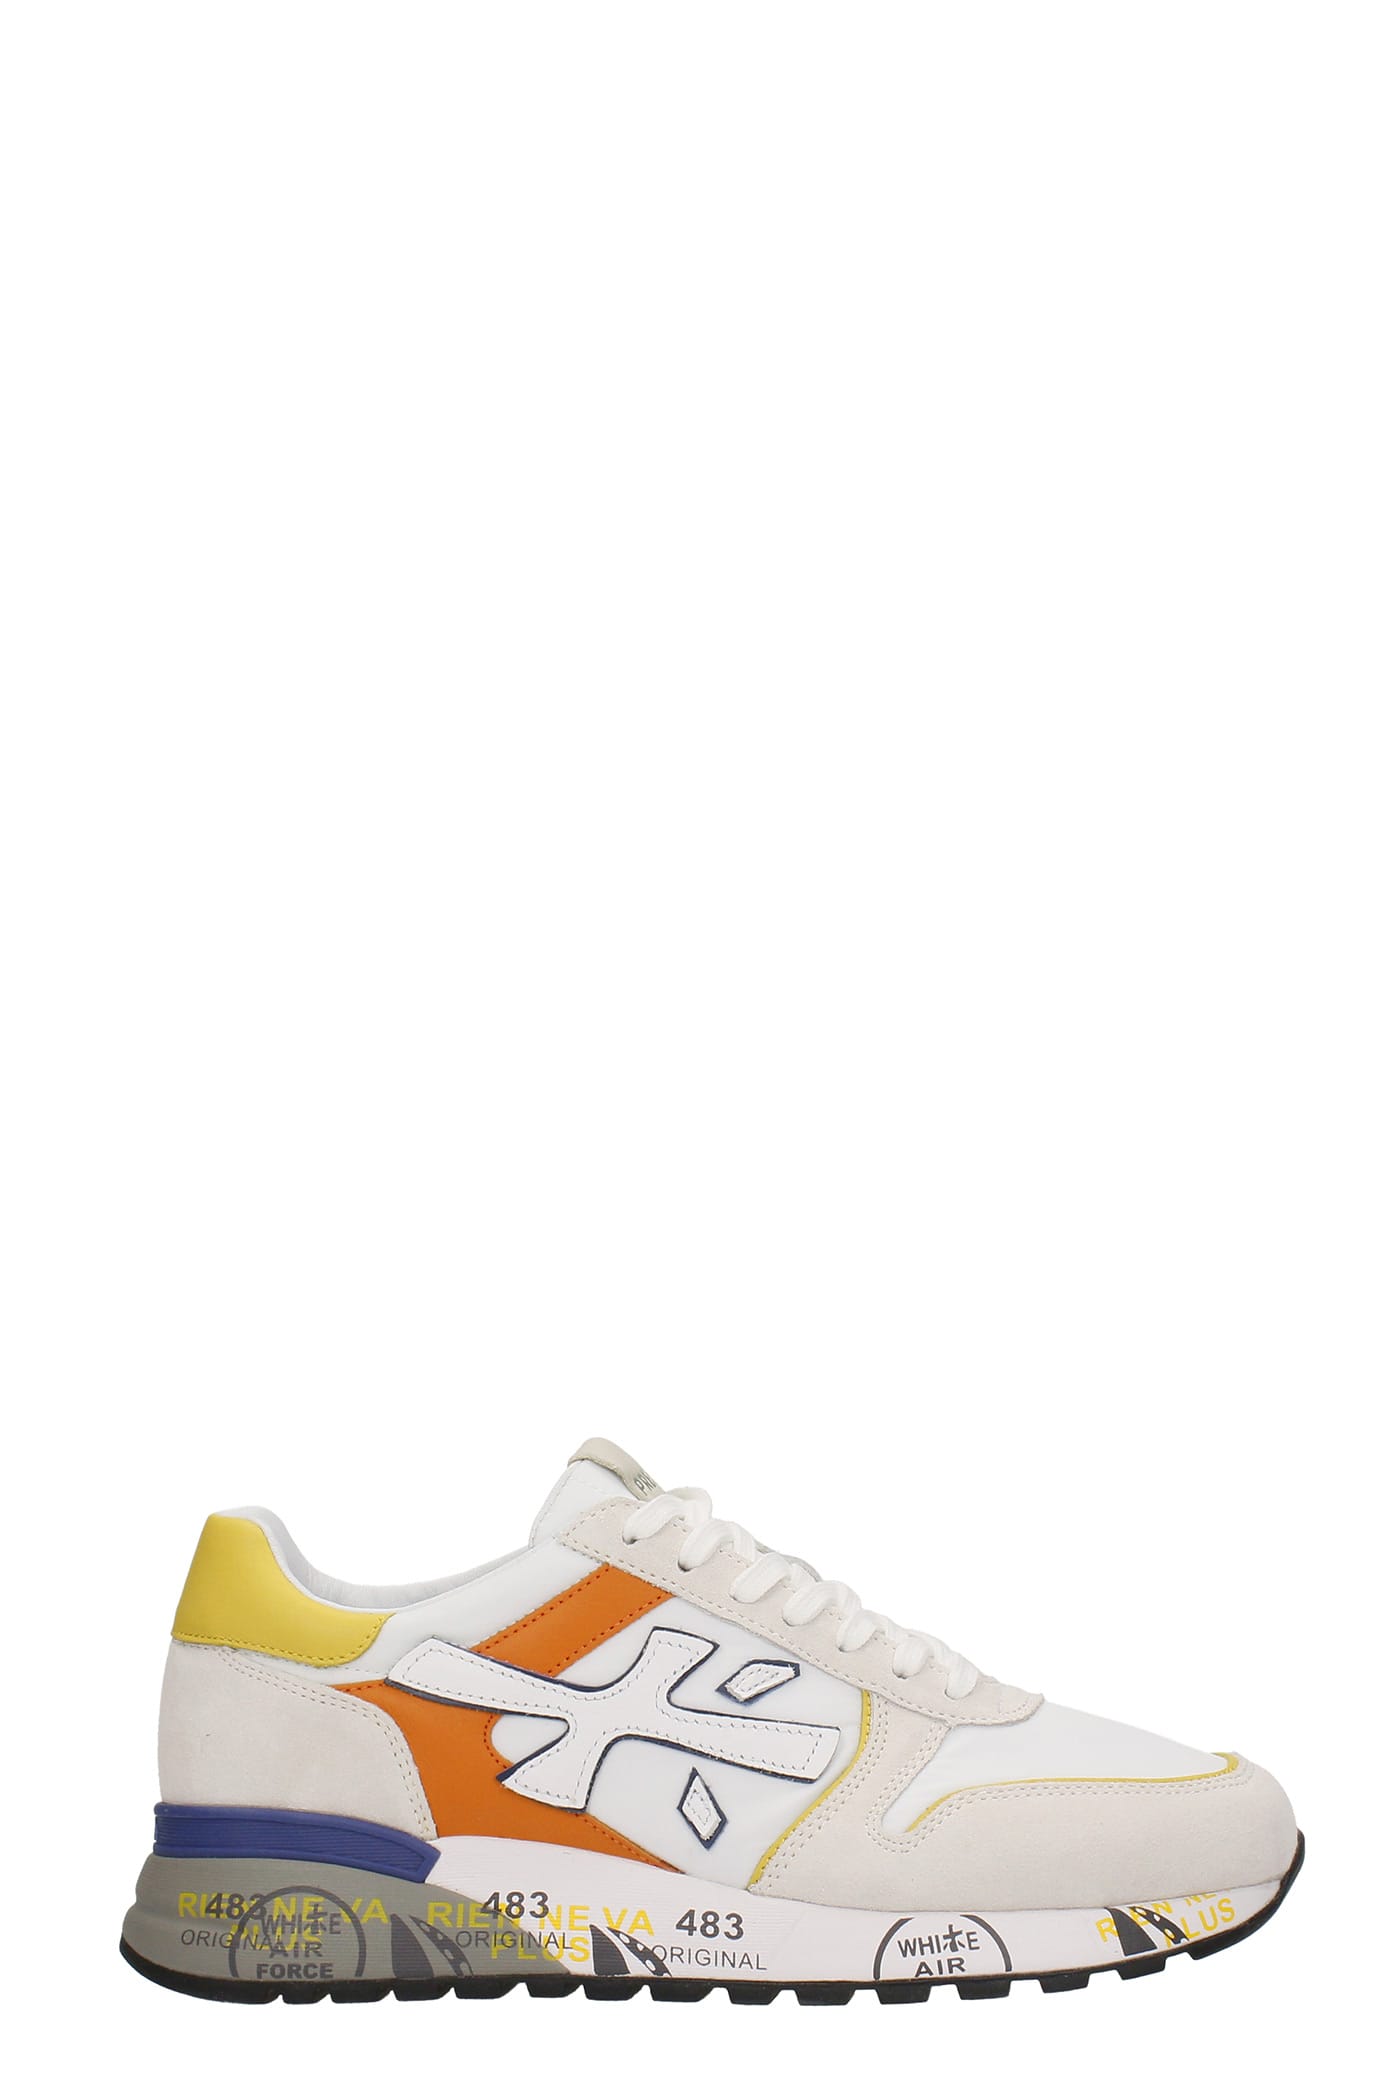 Premiata Mick Sneakers In White Suede And Fabric